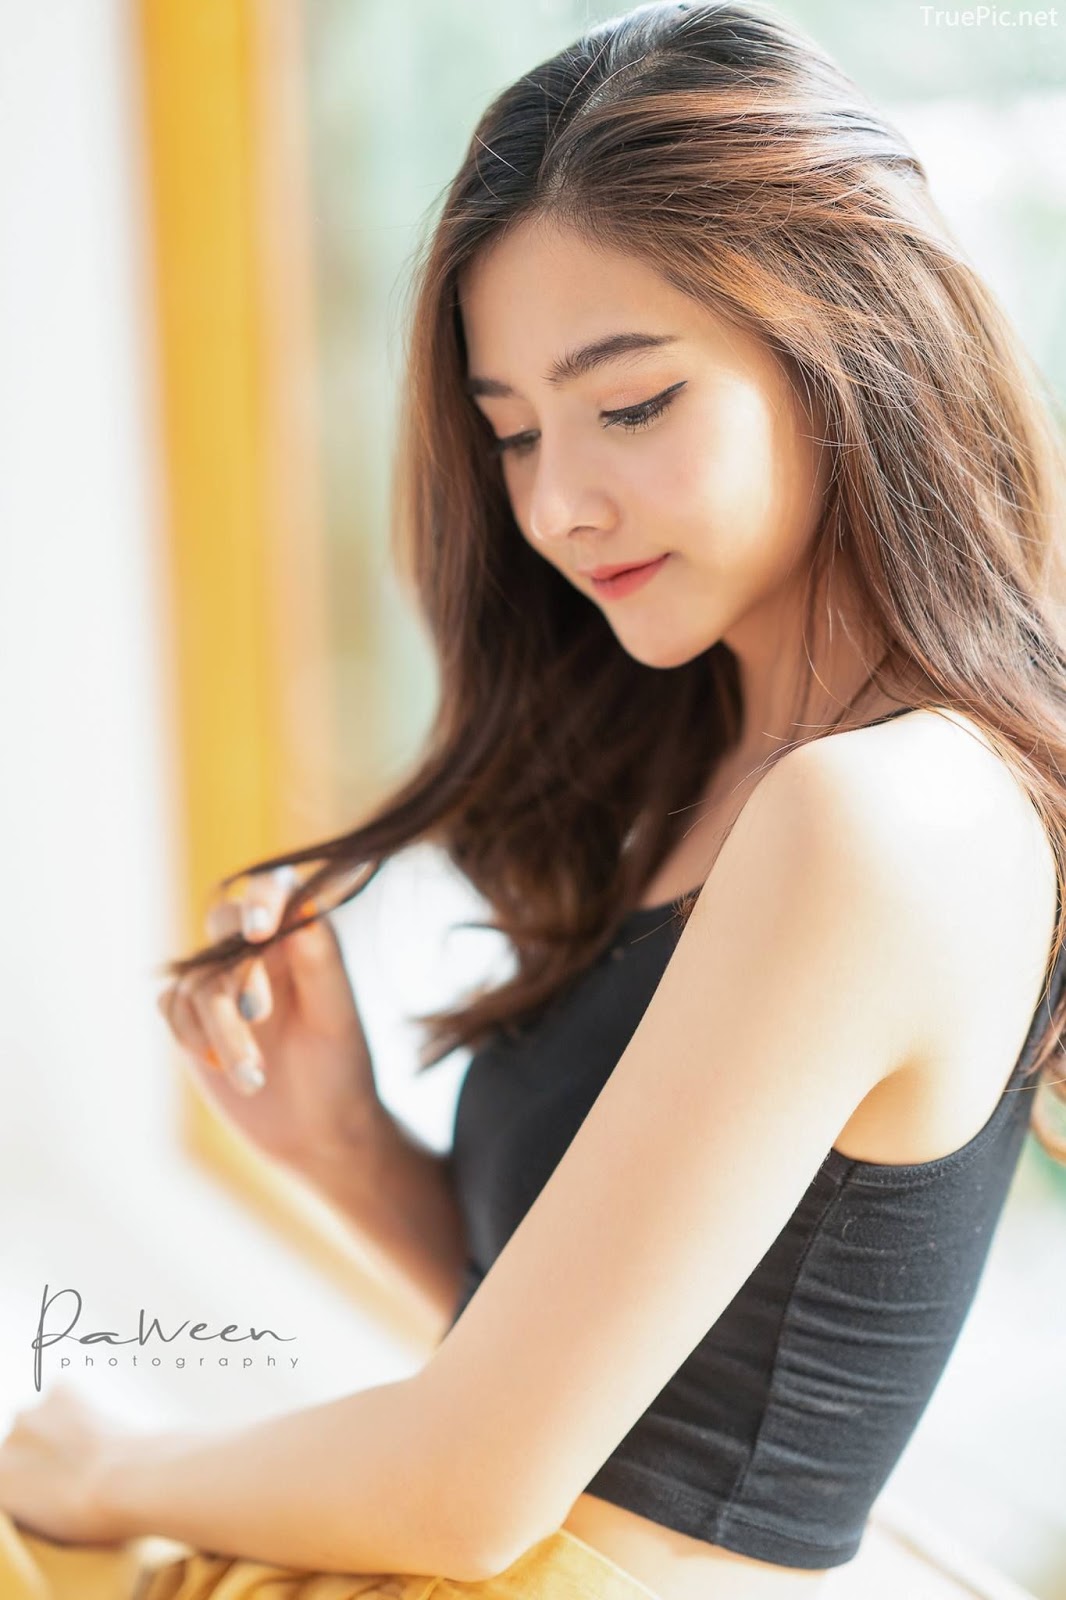 True Pic Thailand Pretty Girl Aintoaon Nantawong The Pure Beauty Of